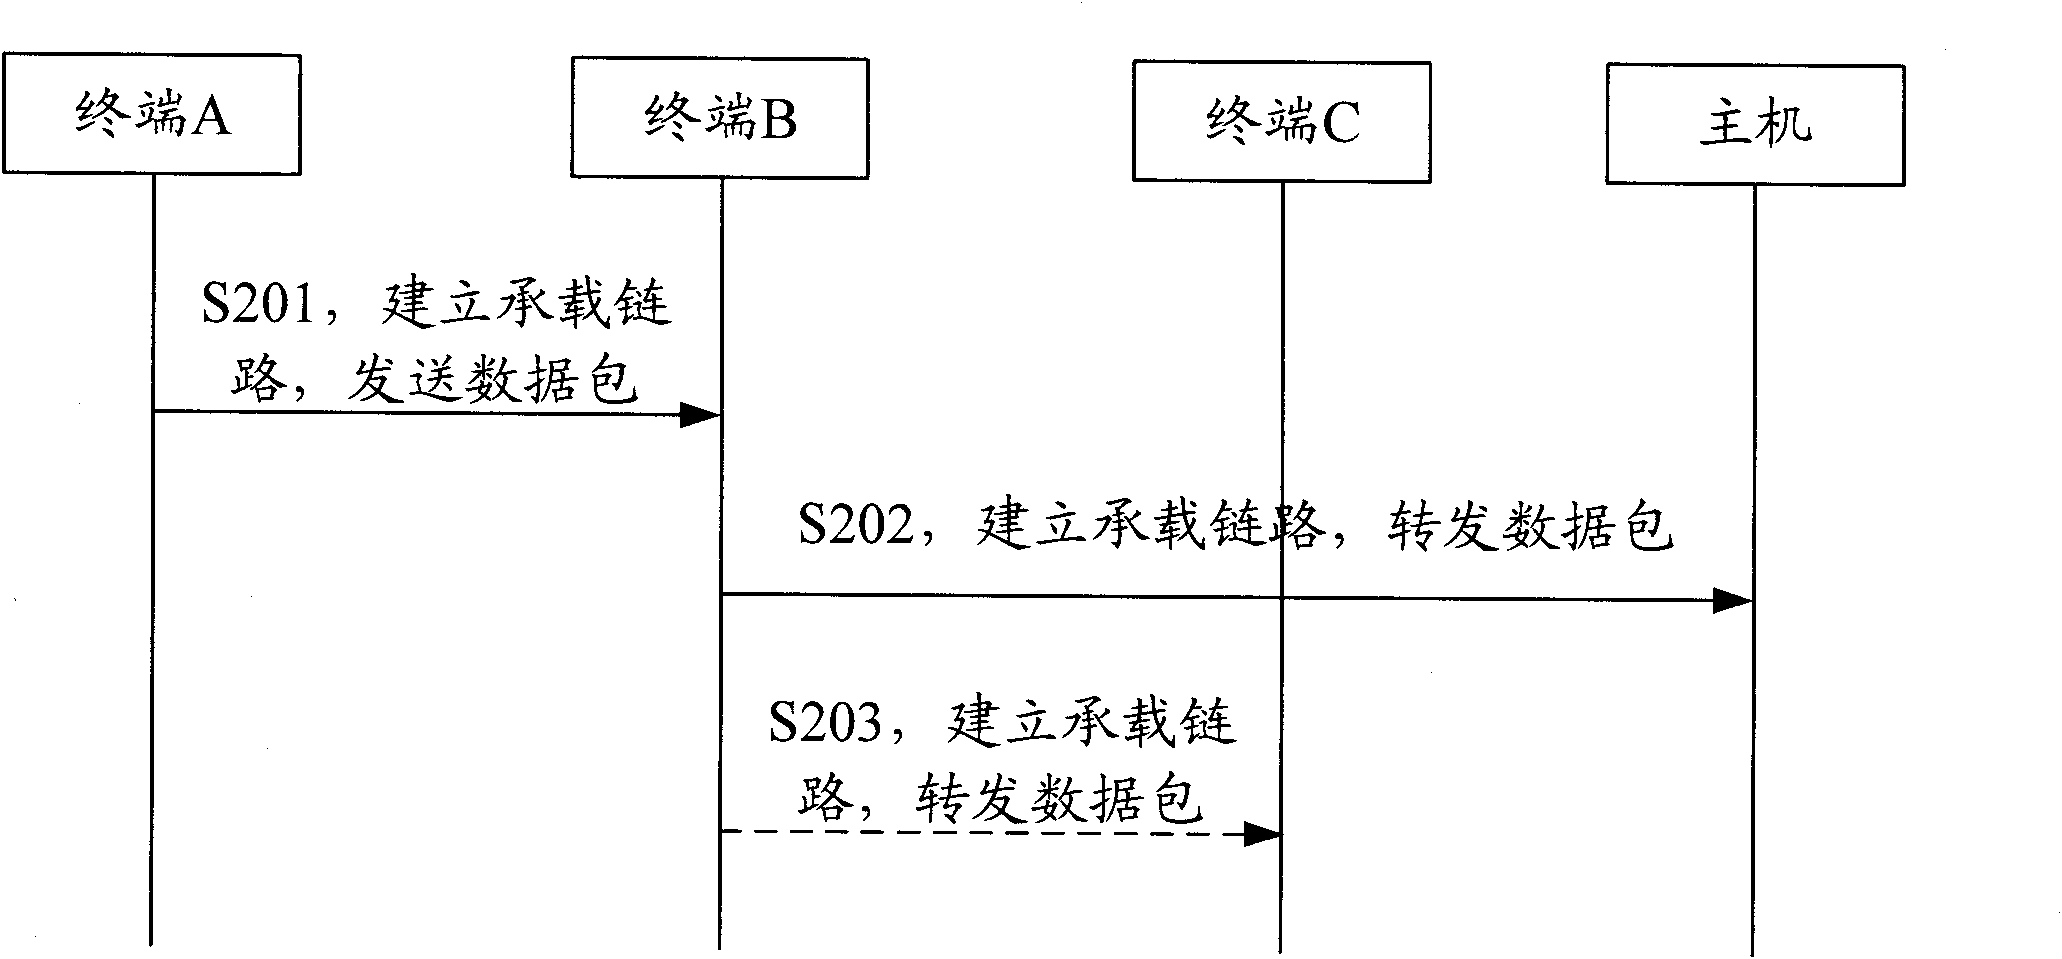 Data packet transmission method and terminal equipment